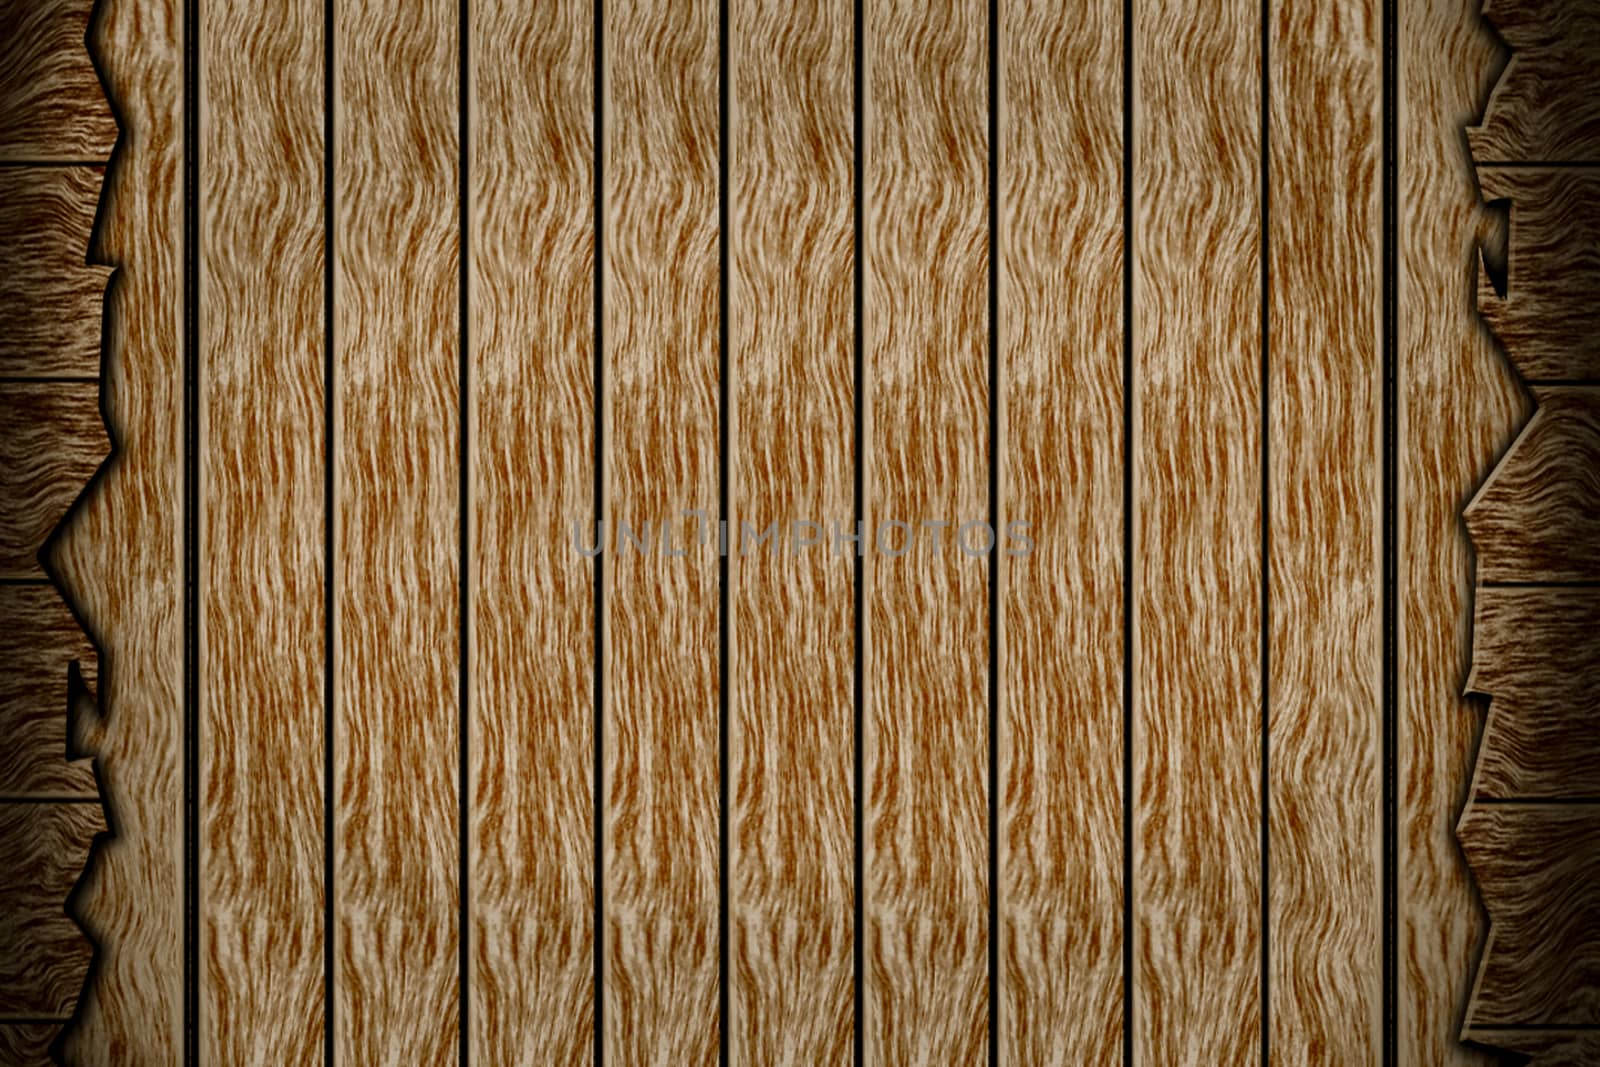 Cracked wood plank background. by toodlingstudio